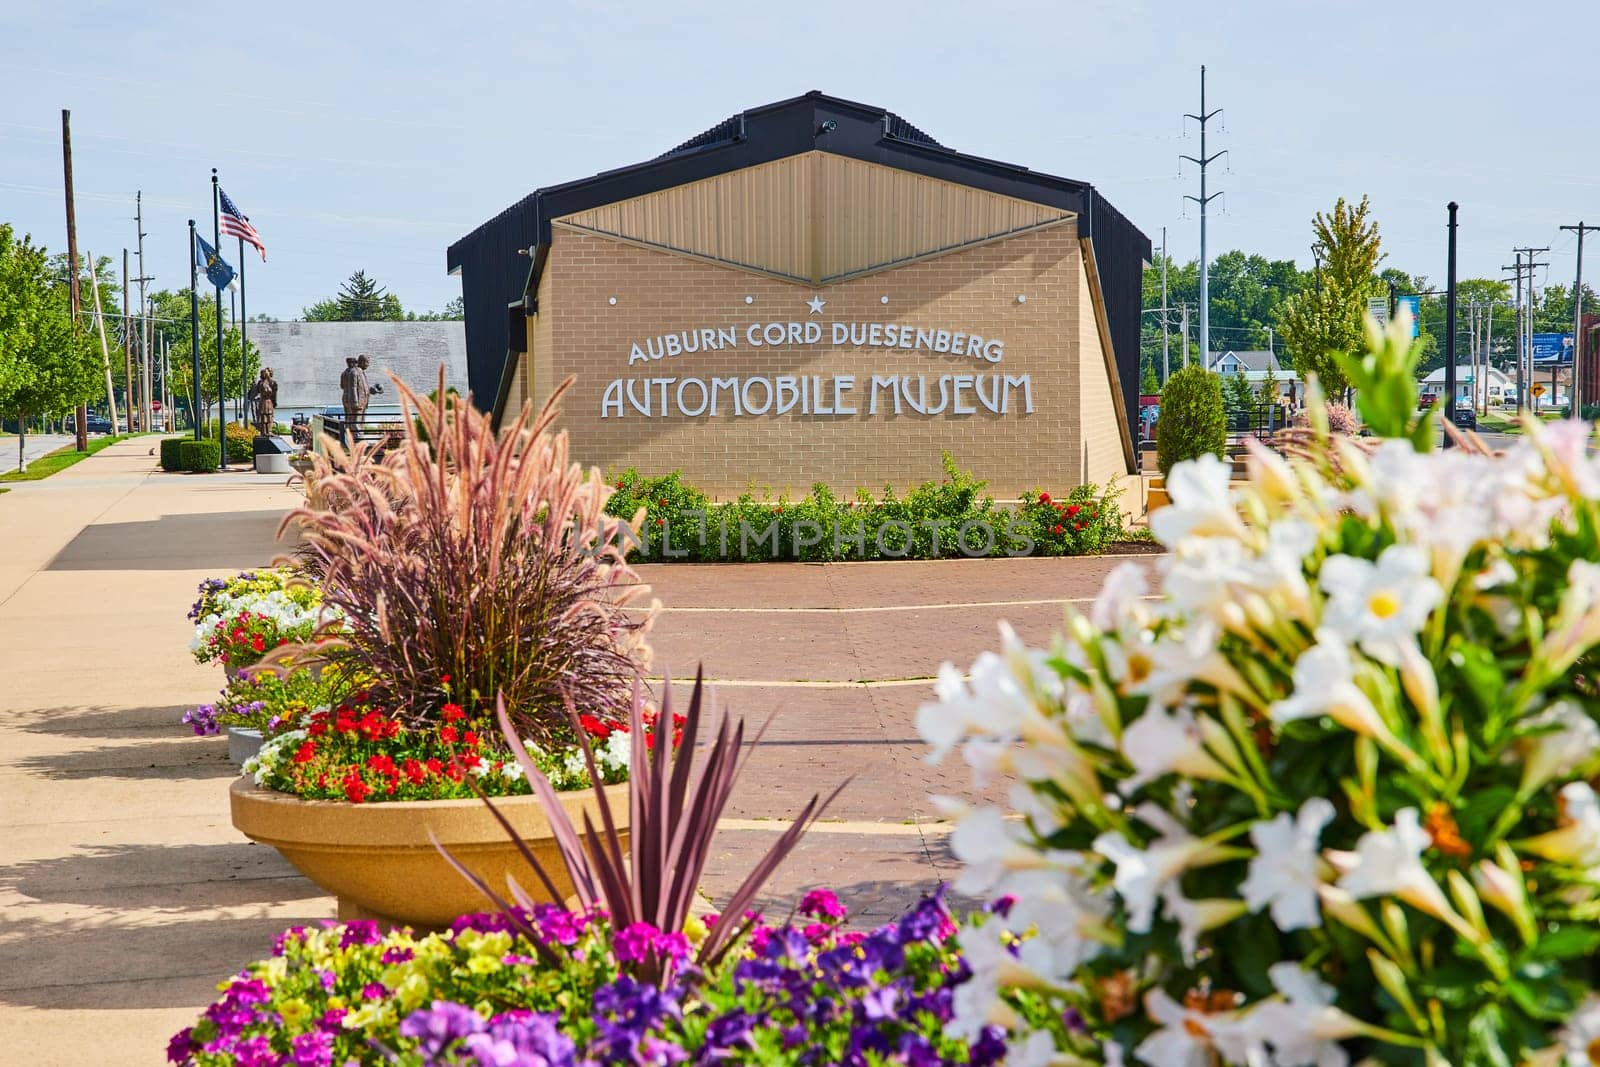 Image of ACD automobile museum sign behind multiple flower pots with colorful assortment of flowers